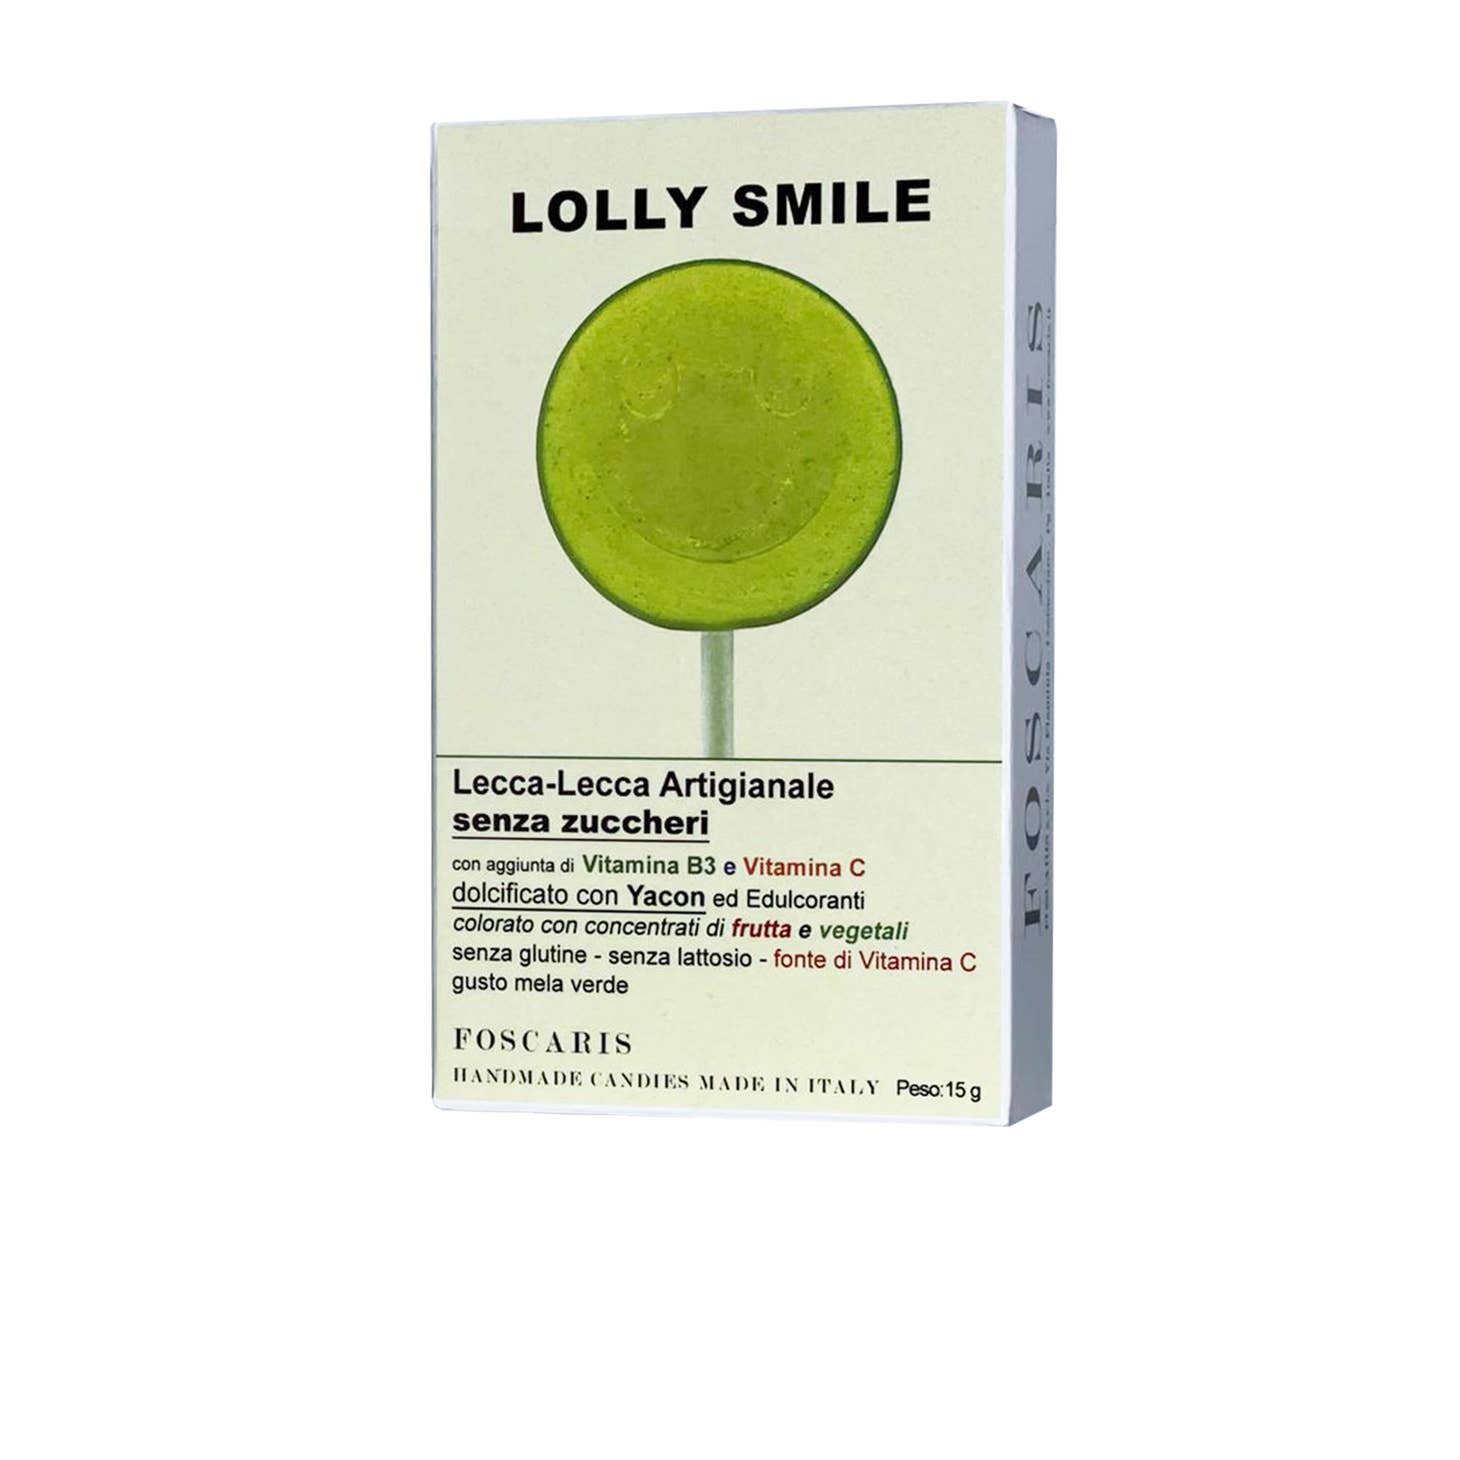 Lolly, with green apple flavour